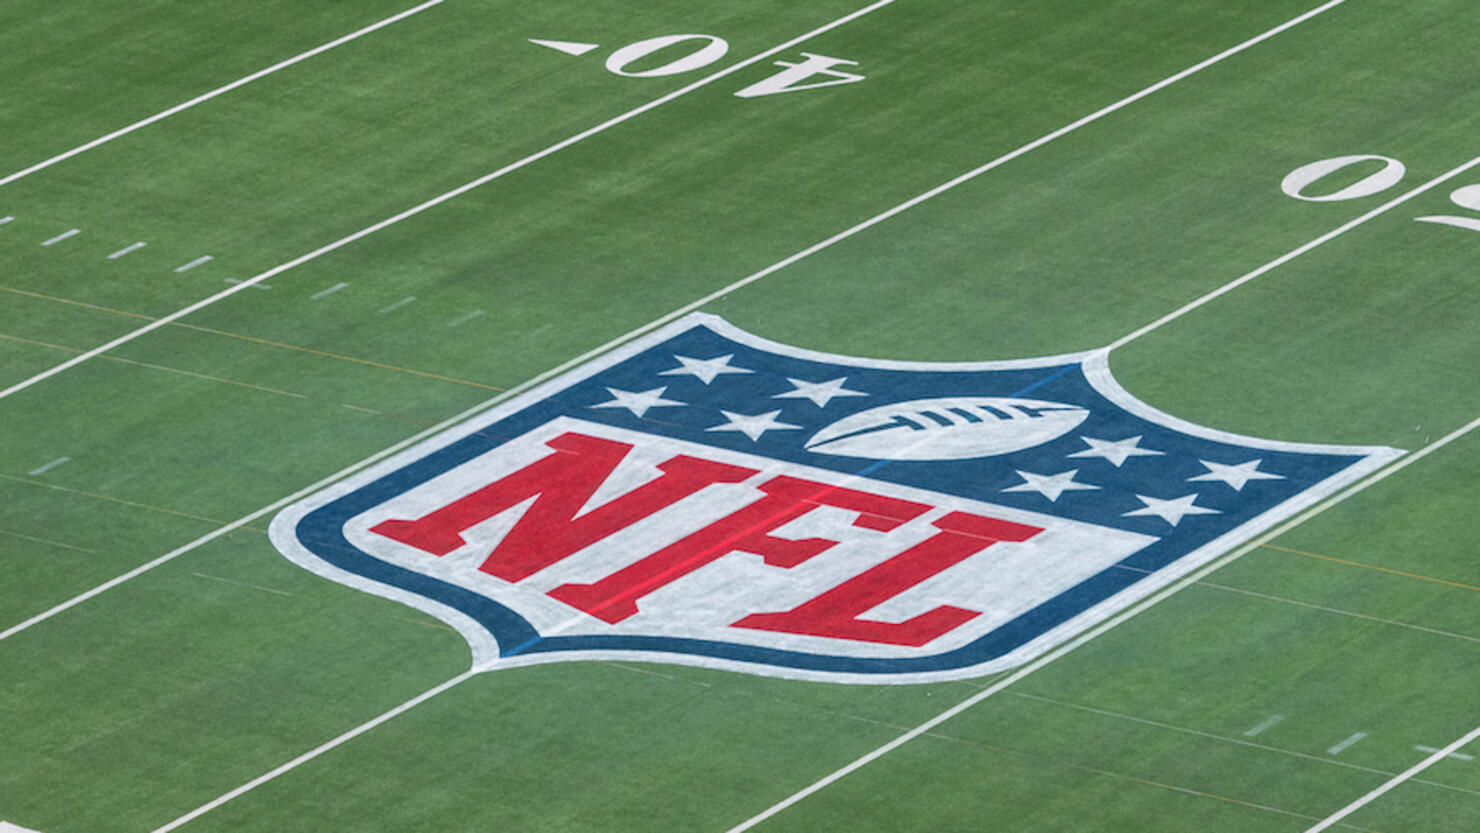 NFL suspends 5 players for violating gambling policy